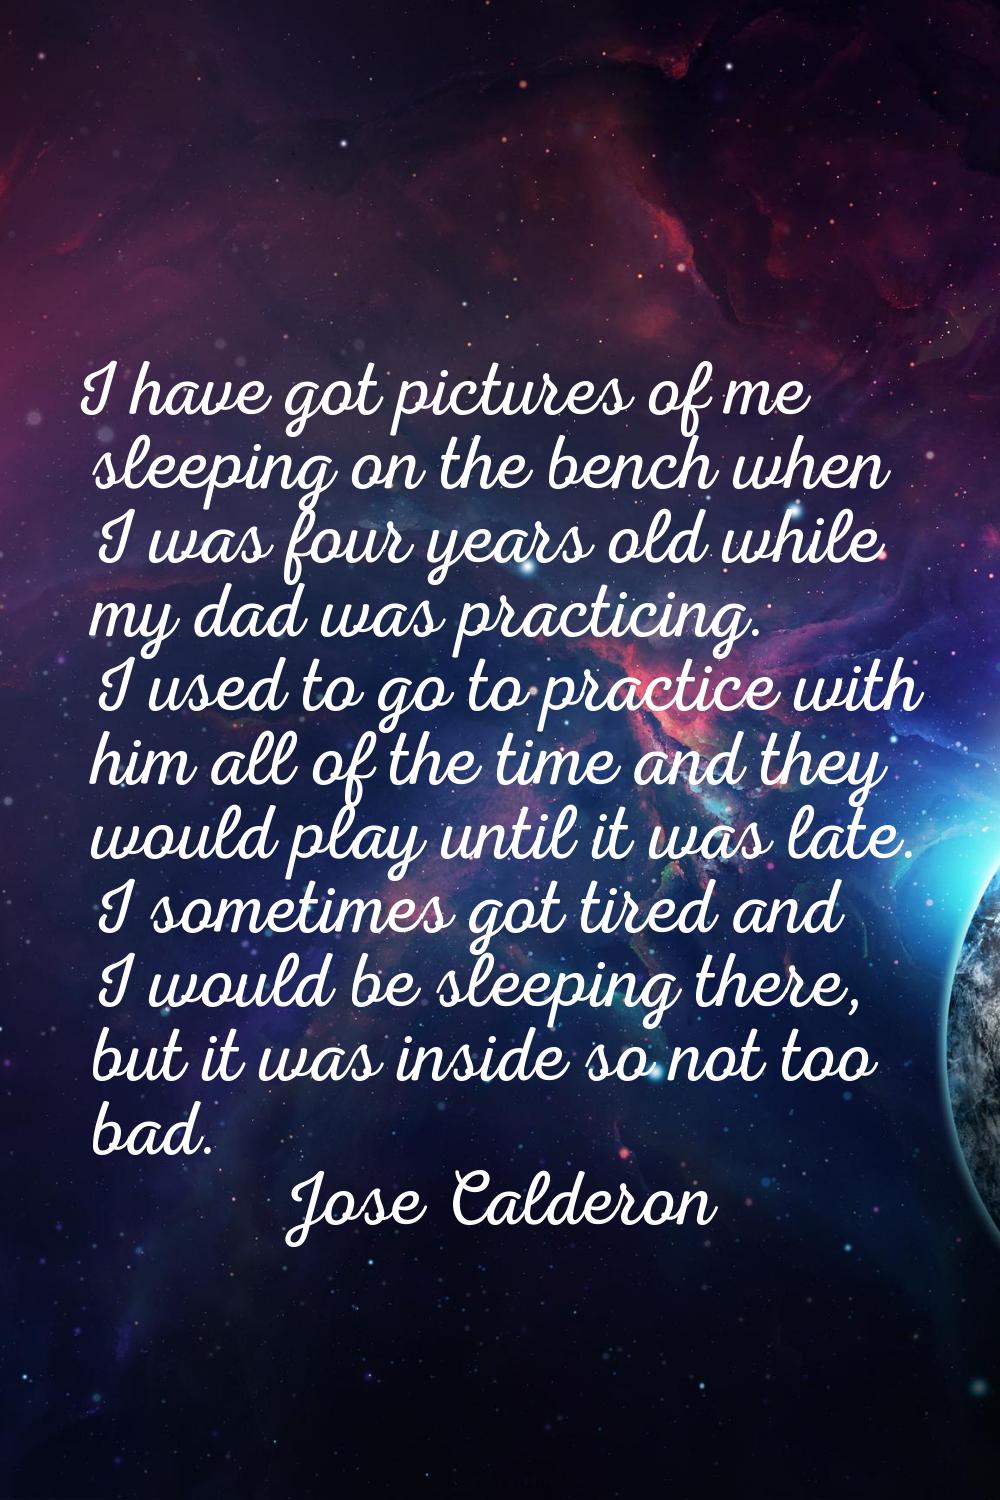 I have got pictures of me sleeping on the bench when I was four years old while my dad was practici